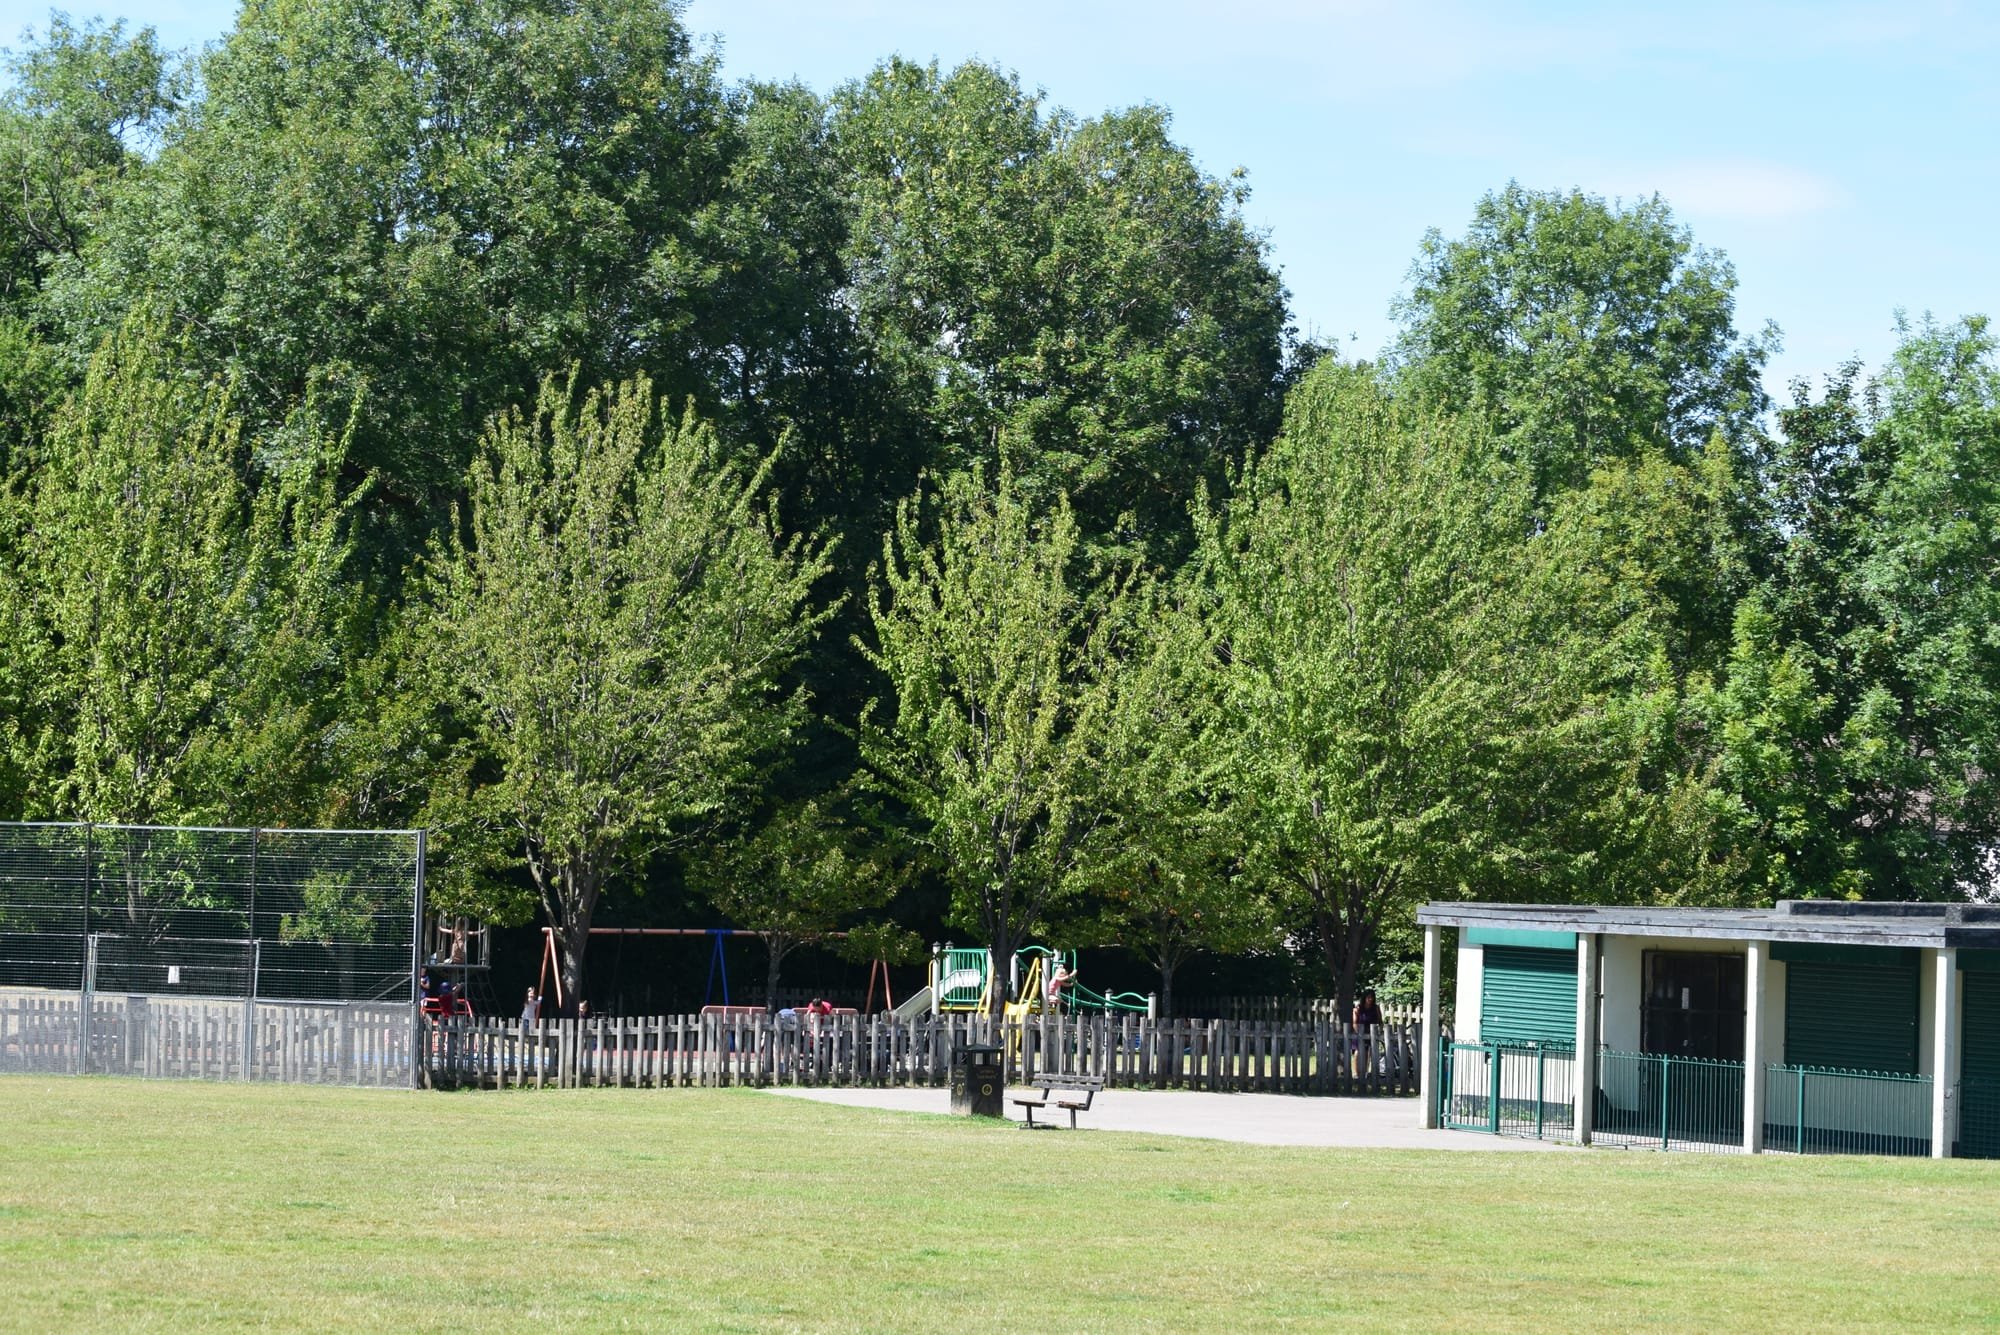 The football pavillion and preschool are between the car park and the playground